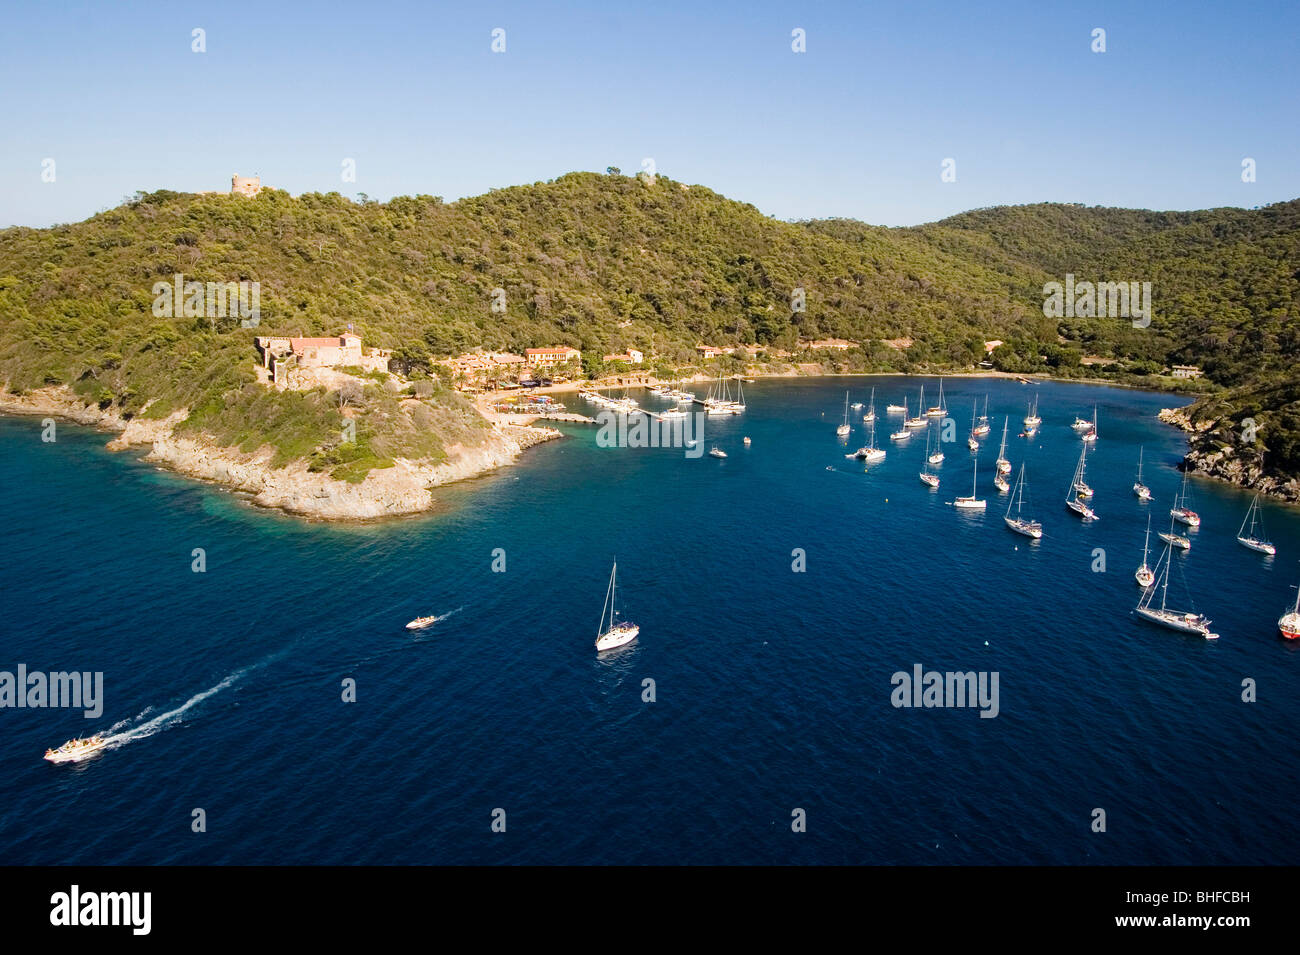 Aerial view of Port Cros with boats in a bay, Iles d'Hyeres, France, Europe Stock Photo